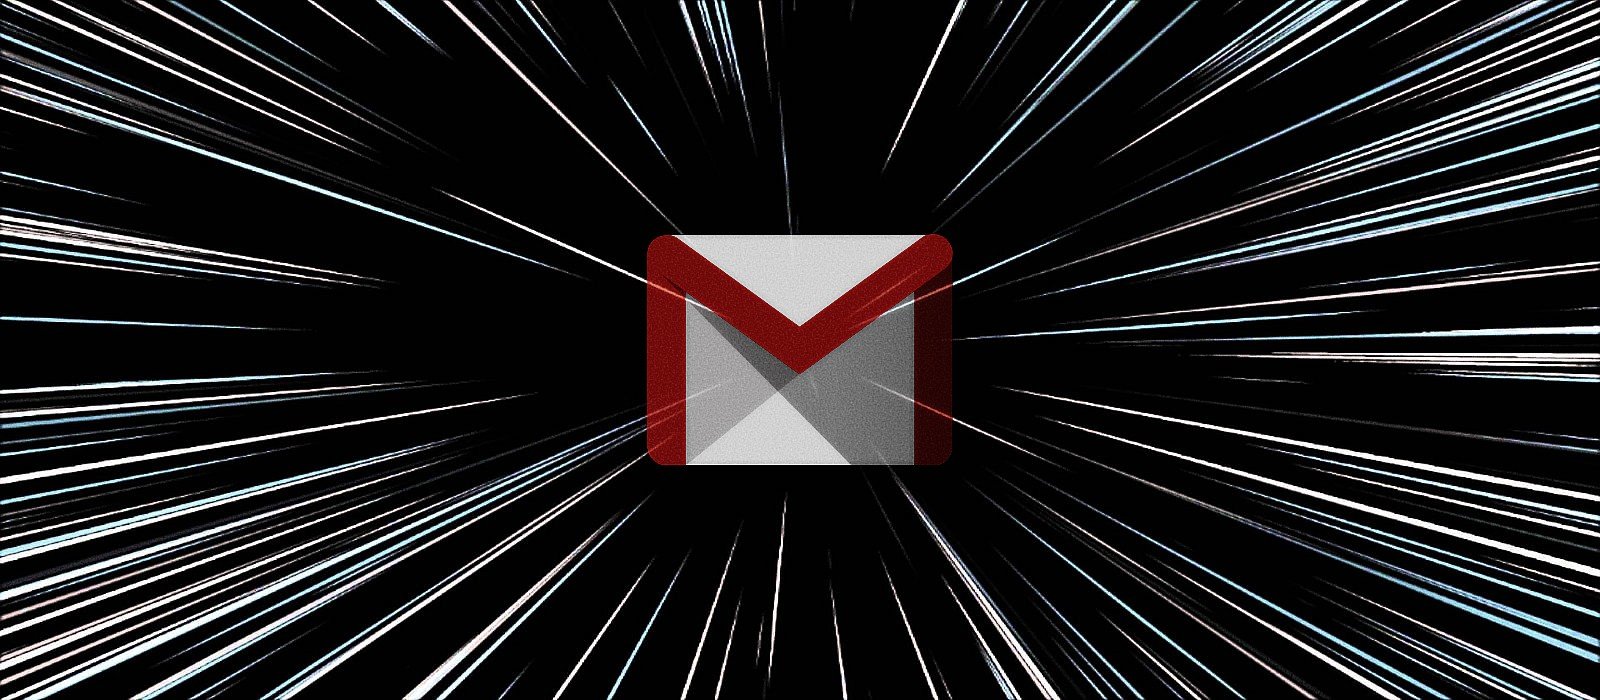 Gmail outage affects millions worldwide; Google acknowledges delays, says  fixing